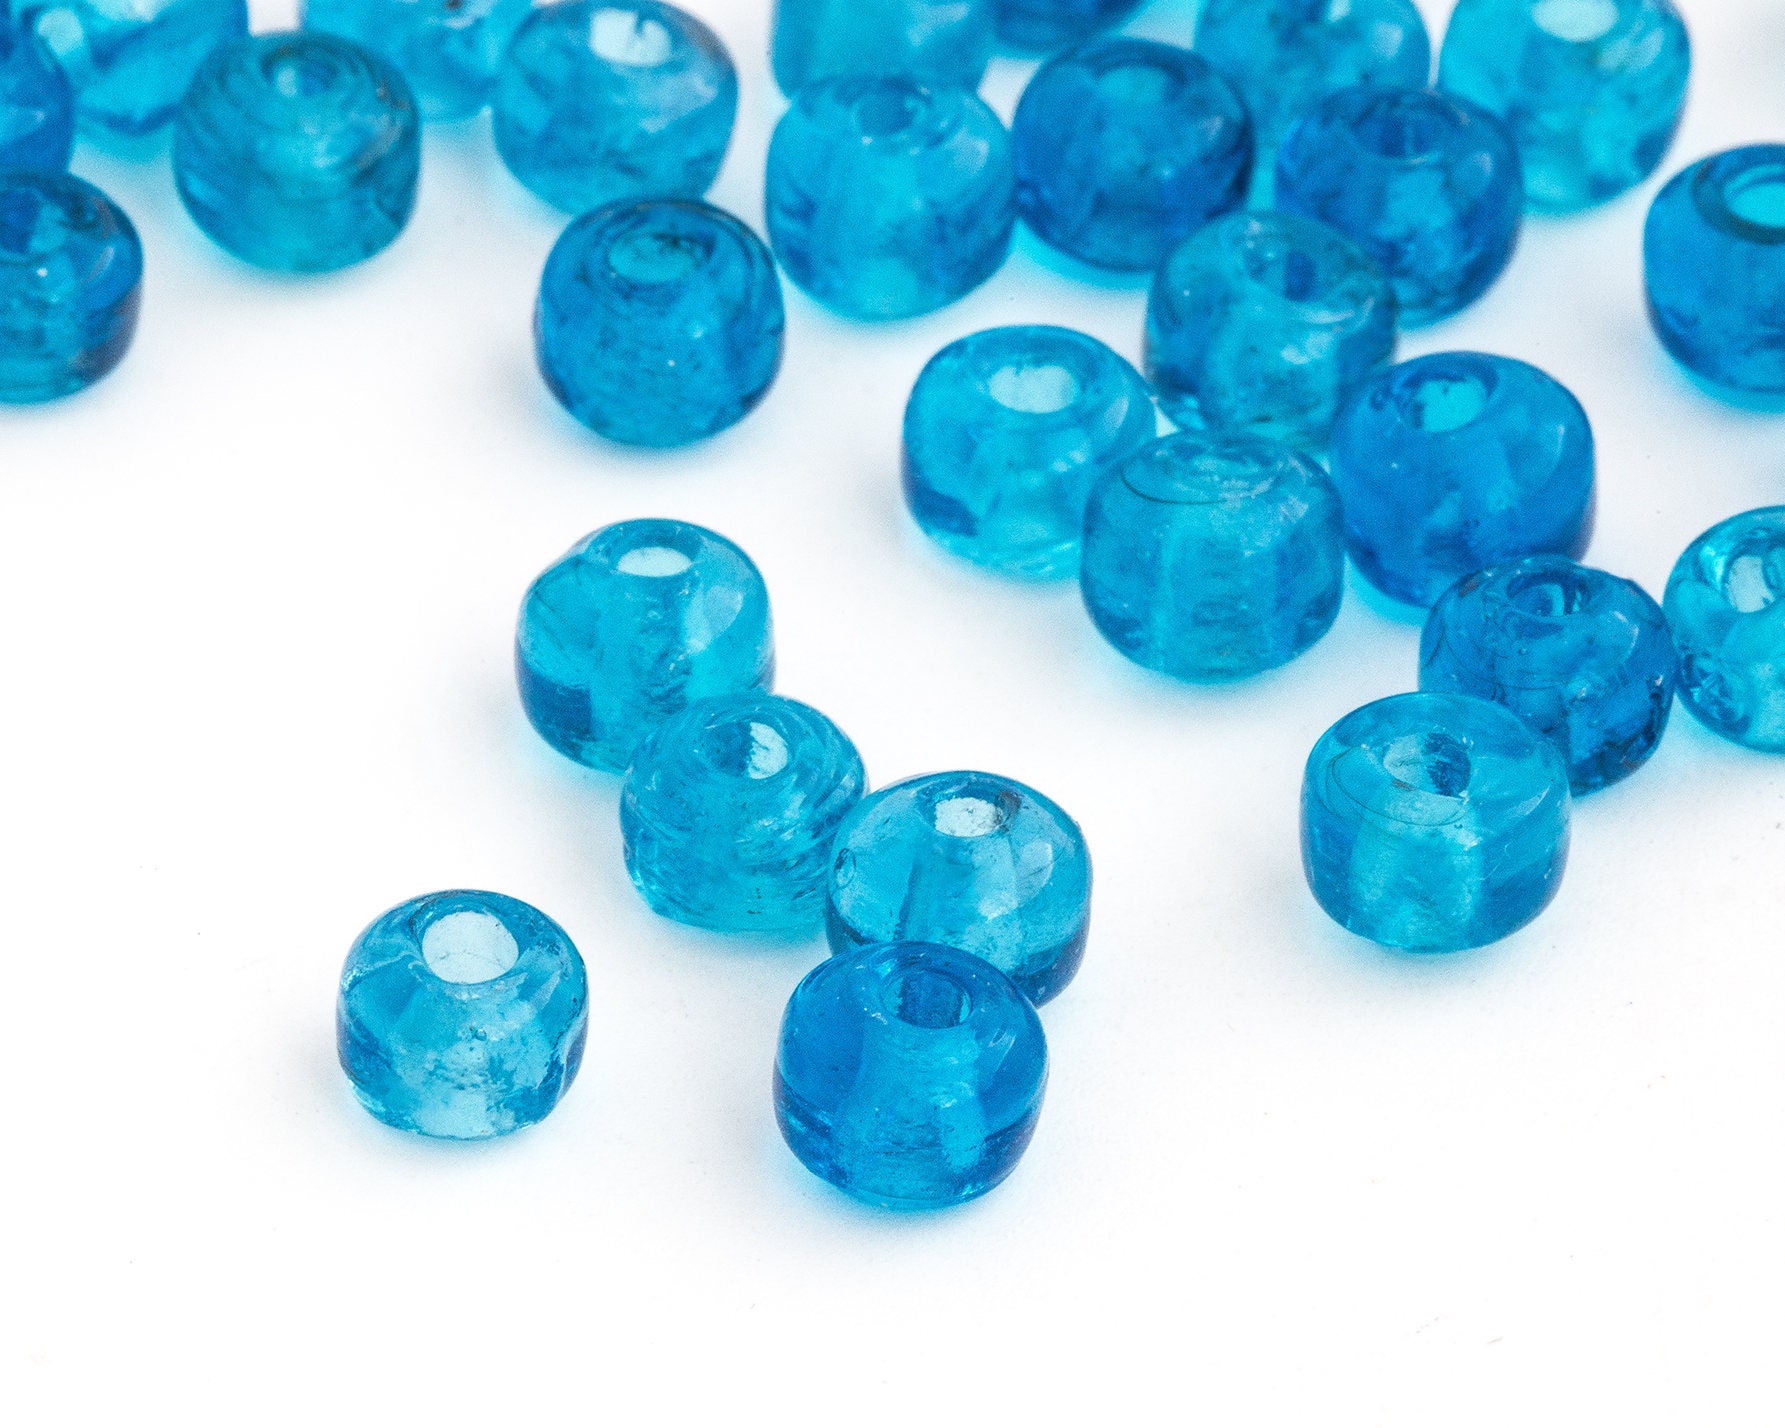 5mm Hole Round Glass Beads 10 Pack Large Hole Bead for Macrame 16mm  Diameter 7 Colour Options 